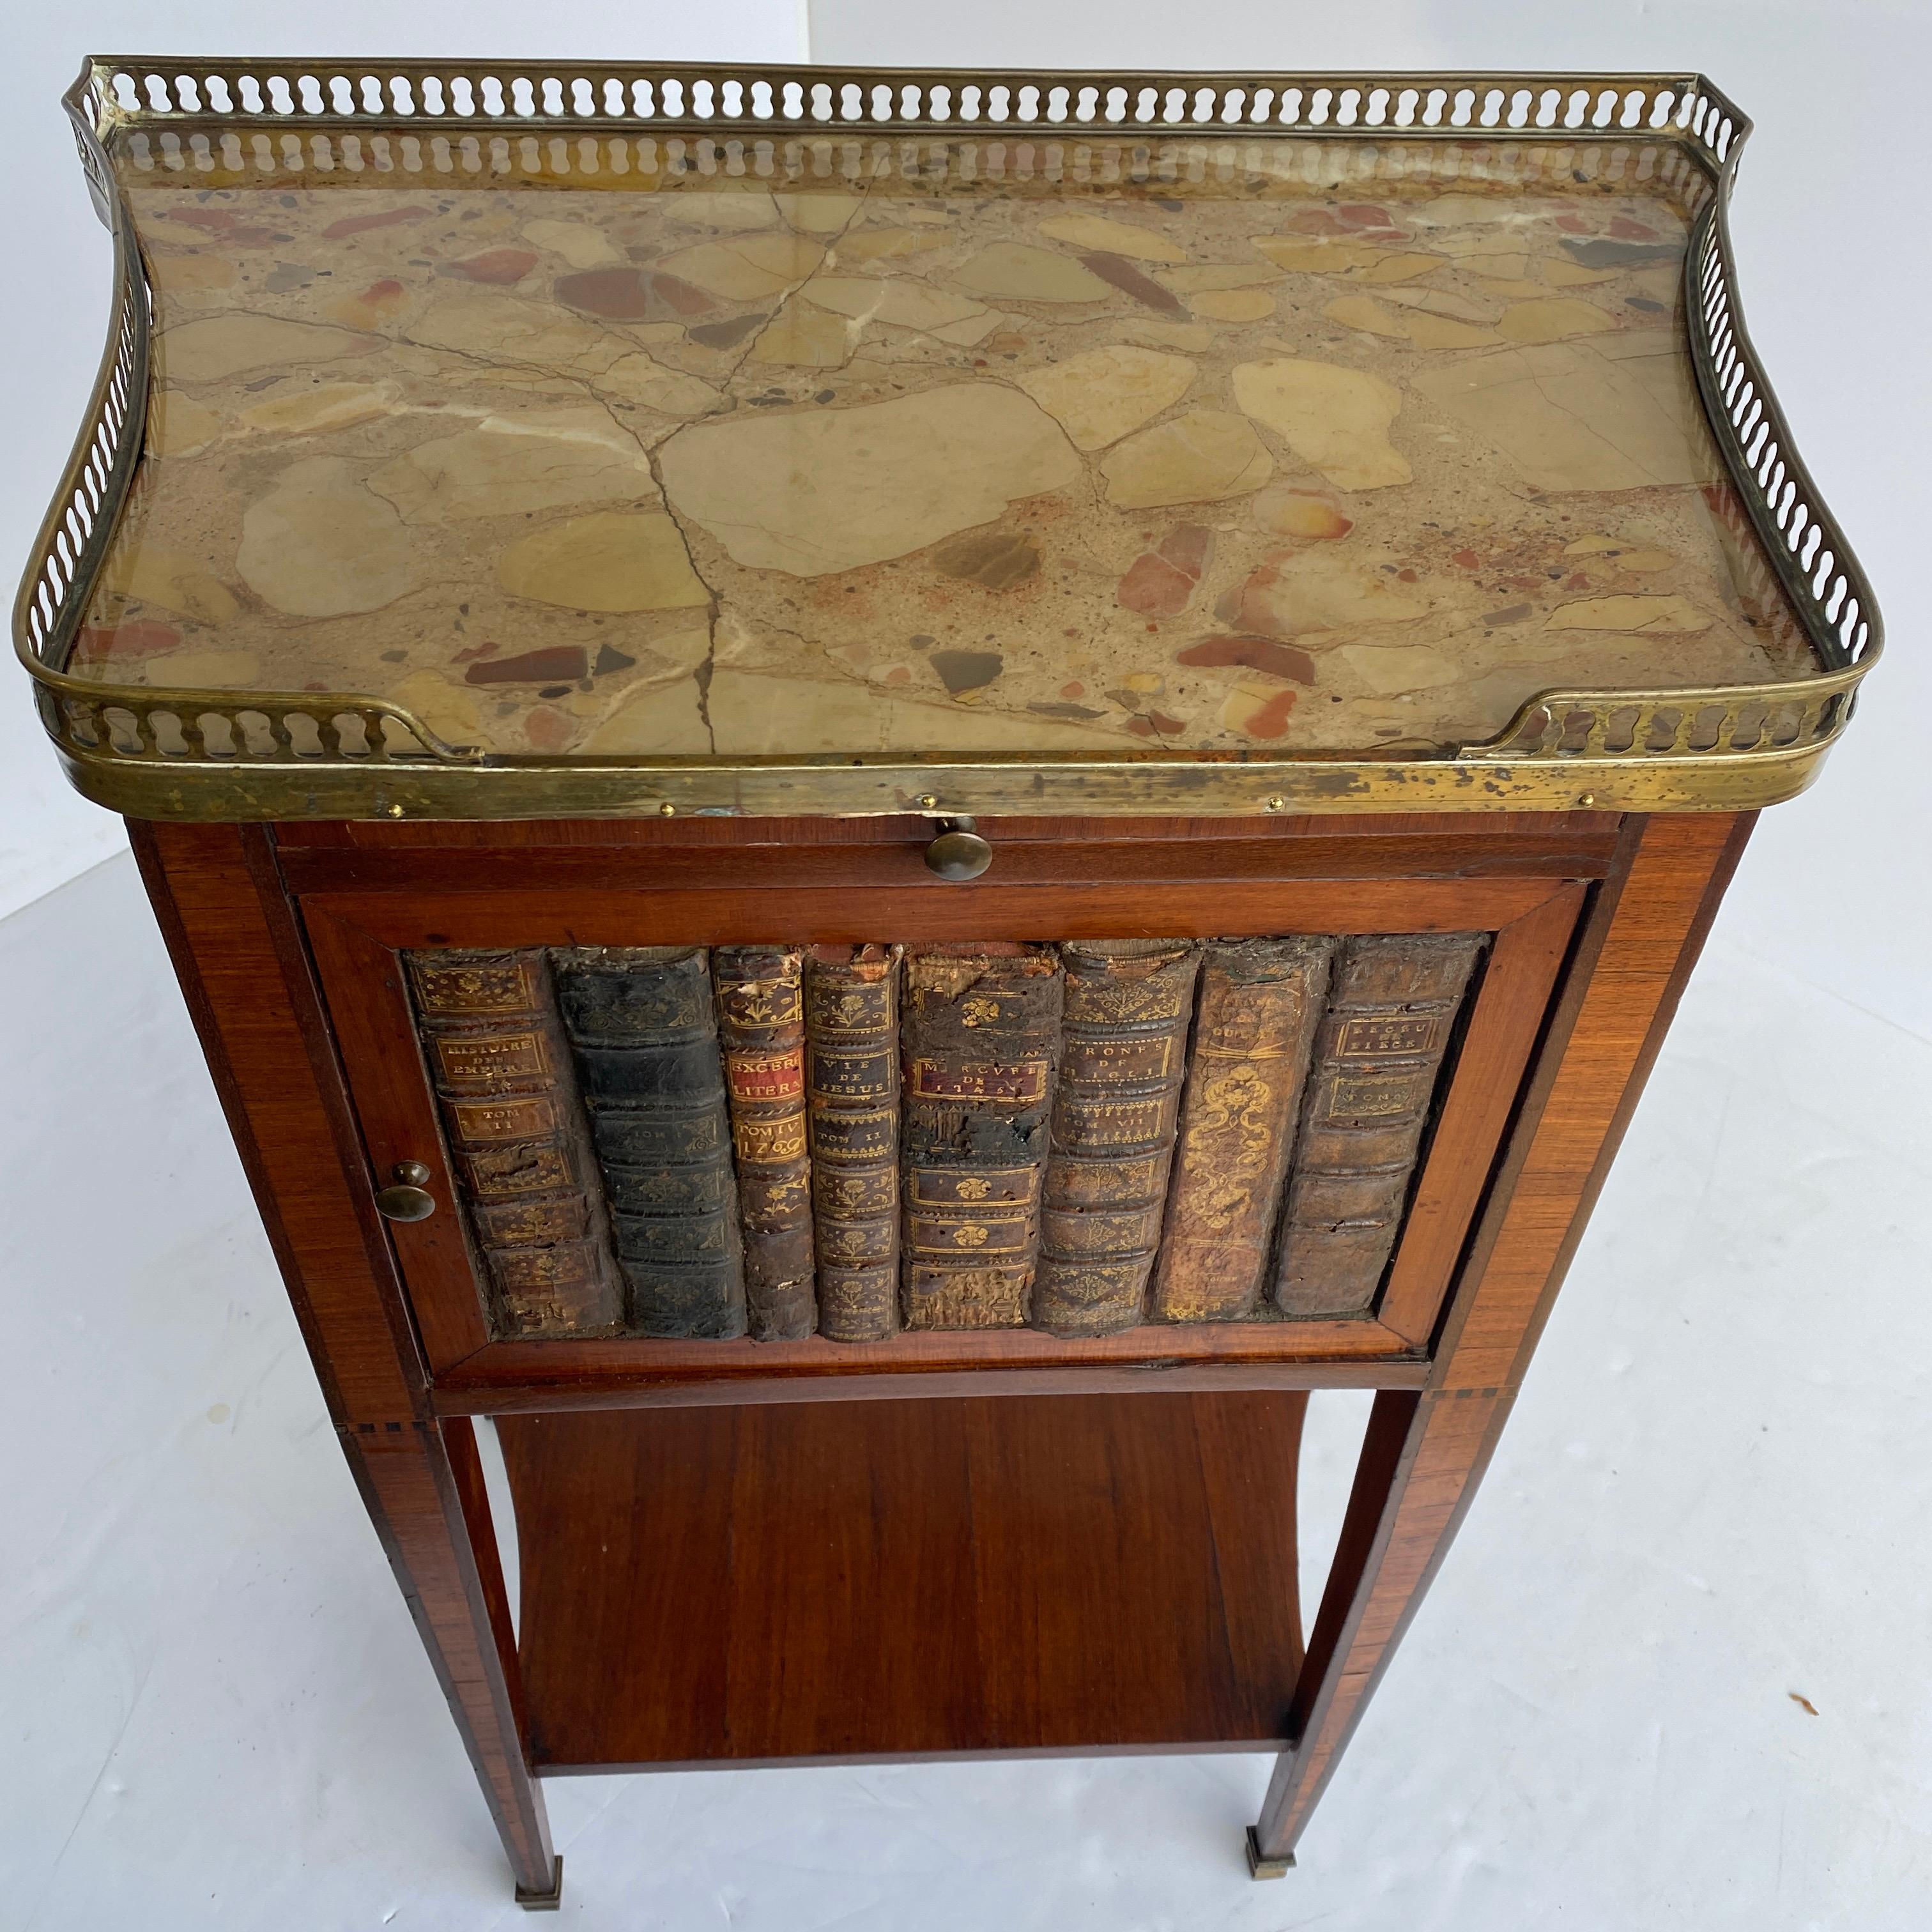 French 19th Century Side Table with Marble Top, Library Books and Brass Gallery In Good Condition For Sale In Haddonfield, NJ